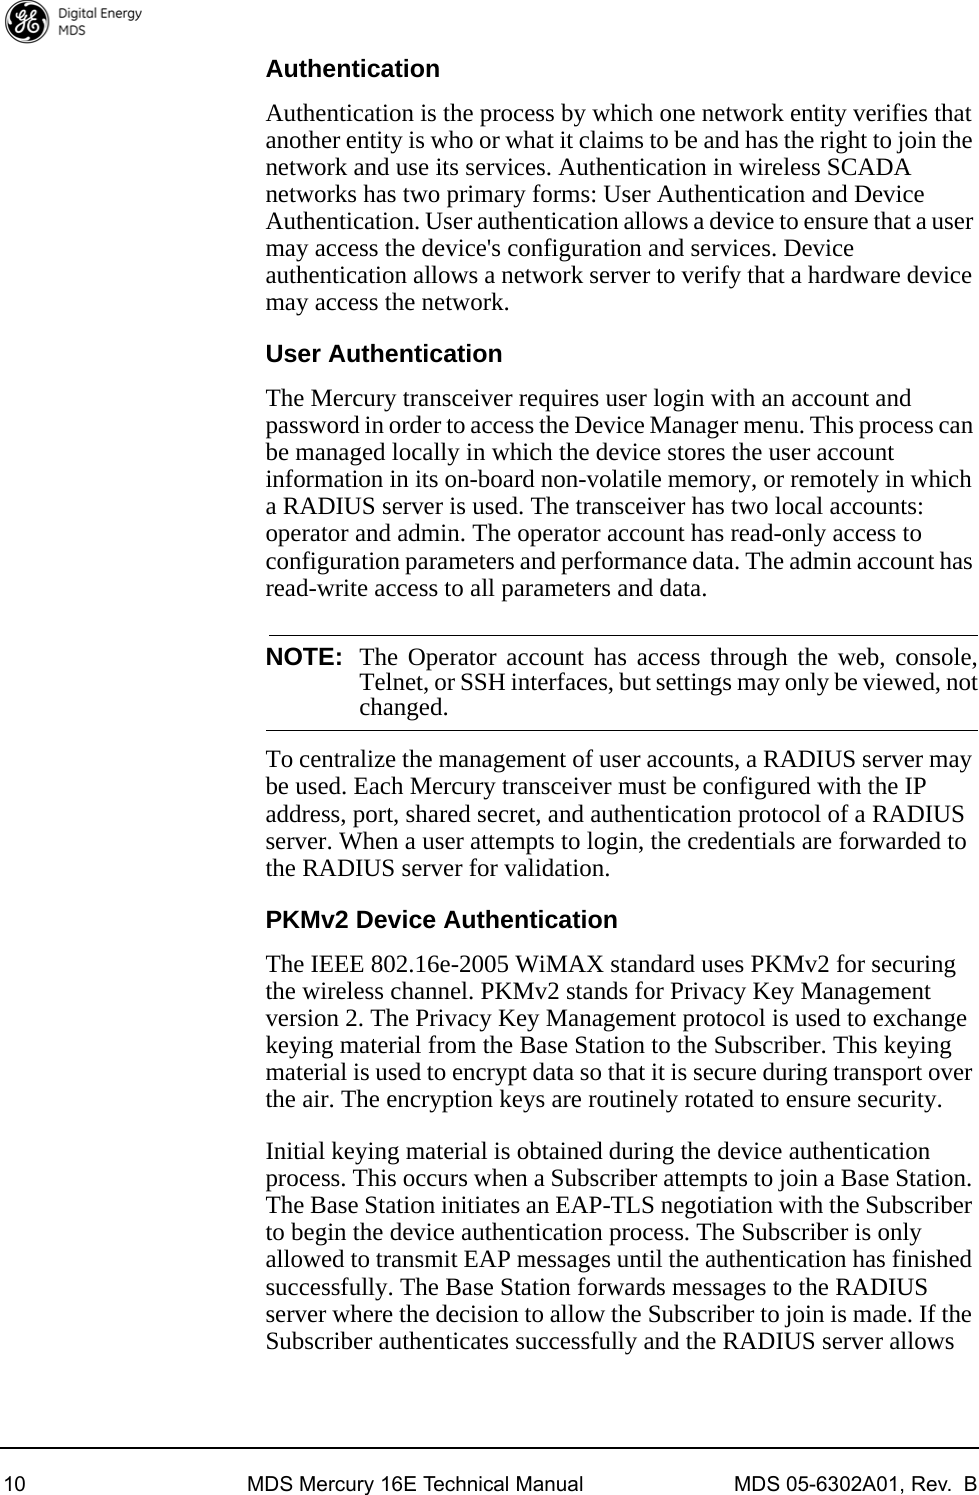 10 MDS Mercury 16E Technical Manual MDS 05-6302A01, Rev.  BAuthenticationAuthentication is the process by which one network entity verifies that another entity is who or what it claims to be and has the right to join the network and use its services. Authentication in wireless SCADA networks has two primary forms: User Authentication and Device Authentication. User authentication allows a device to ensure that a user may access the device&apos;s configuration and services. Device authentication allows a network server to verify that a hardware device may access the network.User AuthenticationThe Mercury transceiver requires user login with an account and password in order to access the Device Manager menu. This process can be managed locally in which the device stores the user account information in its on-board non-volatile memory, or remotely in which a RADIUS server is used. The transceiver has two local accounts: operator and admin. The operator account has read-only access to configuration parameters and performance data. The admin account has read-write access to all parameters and data. NOTE: The Operator account has access through the web, console,Telnet, or SSH interfaces, but settings may only be viewed, notchanged.To centralize the management of user accounts, a RADIUS server may be used. Each Mercury transceiver must be configured with the IP address, port, shared secret, and authentication protocol of a RADIUS server. When a user attempts to login, the credentials are forwarded to the RADIUS server for validation.PKMv2 Device AuthenticationThe IEEE 802.16e-2005 WiMAX standard uses PKMv2 for securing the wireless channel. PKMv2 stands for Privacy Key Management version 2. The Privacy Key Management protocol is used to exchange keying material from the Base Station to the Subscriber. This keying material is used to encrypt data so that it is secure during transport over the air. The encryption keys are routinely rotated to ensure security.Initial keying material is obtained during the device authentication process. This occurs when a Subscriber attempts to join a Base Station. The Base Station initiates an EAP-TLS negotiation with the Subscriber to begin the device authentication process. The Subscriber is only allowed to transmit EAP messages until the authentication has finished successfully. The Base Station forwards messages to the RADIUS server where the decision to allow the Subscriber to join is made. If the Subscriber authenticates successfully and the RADIUS server allows 